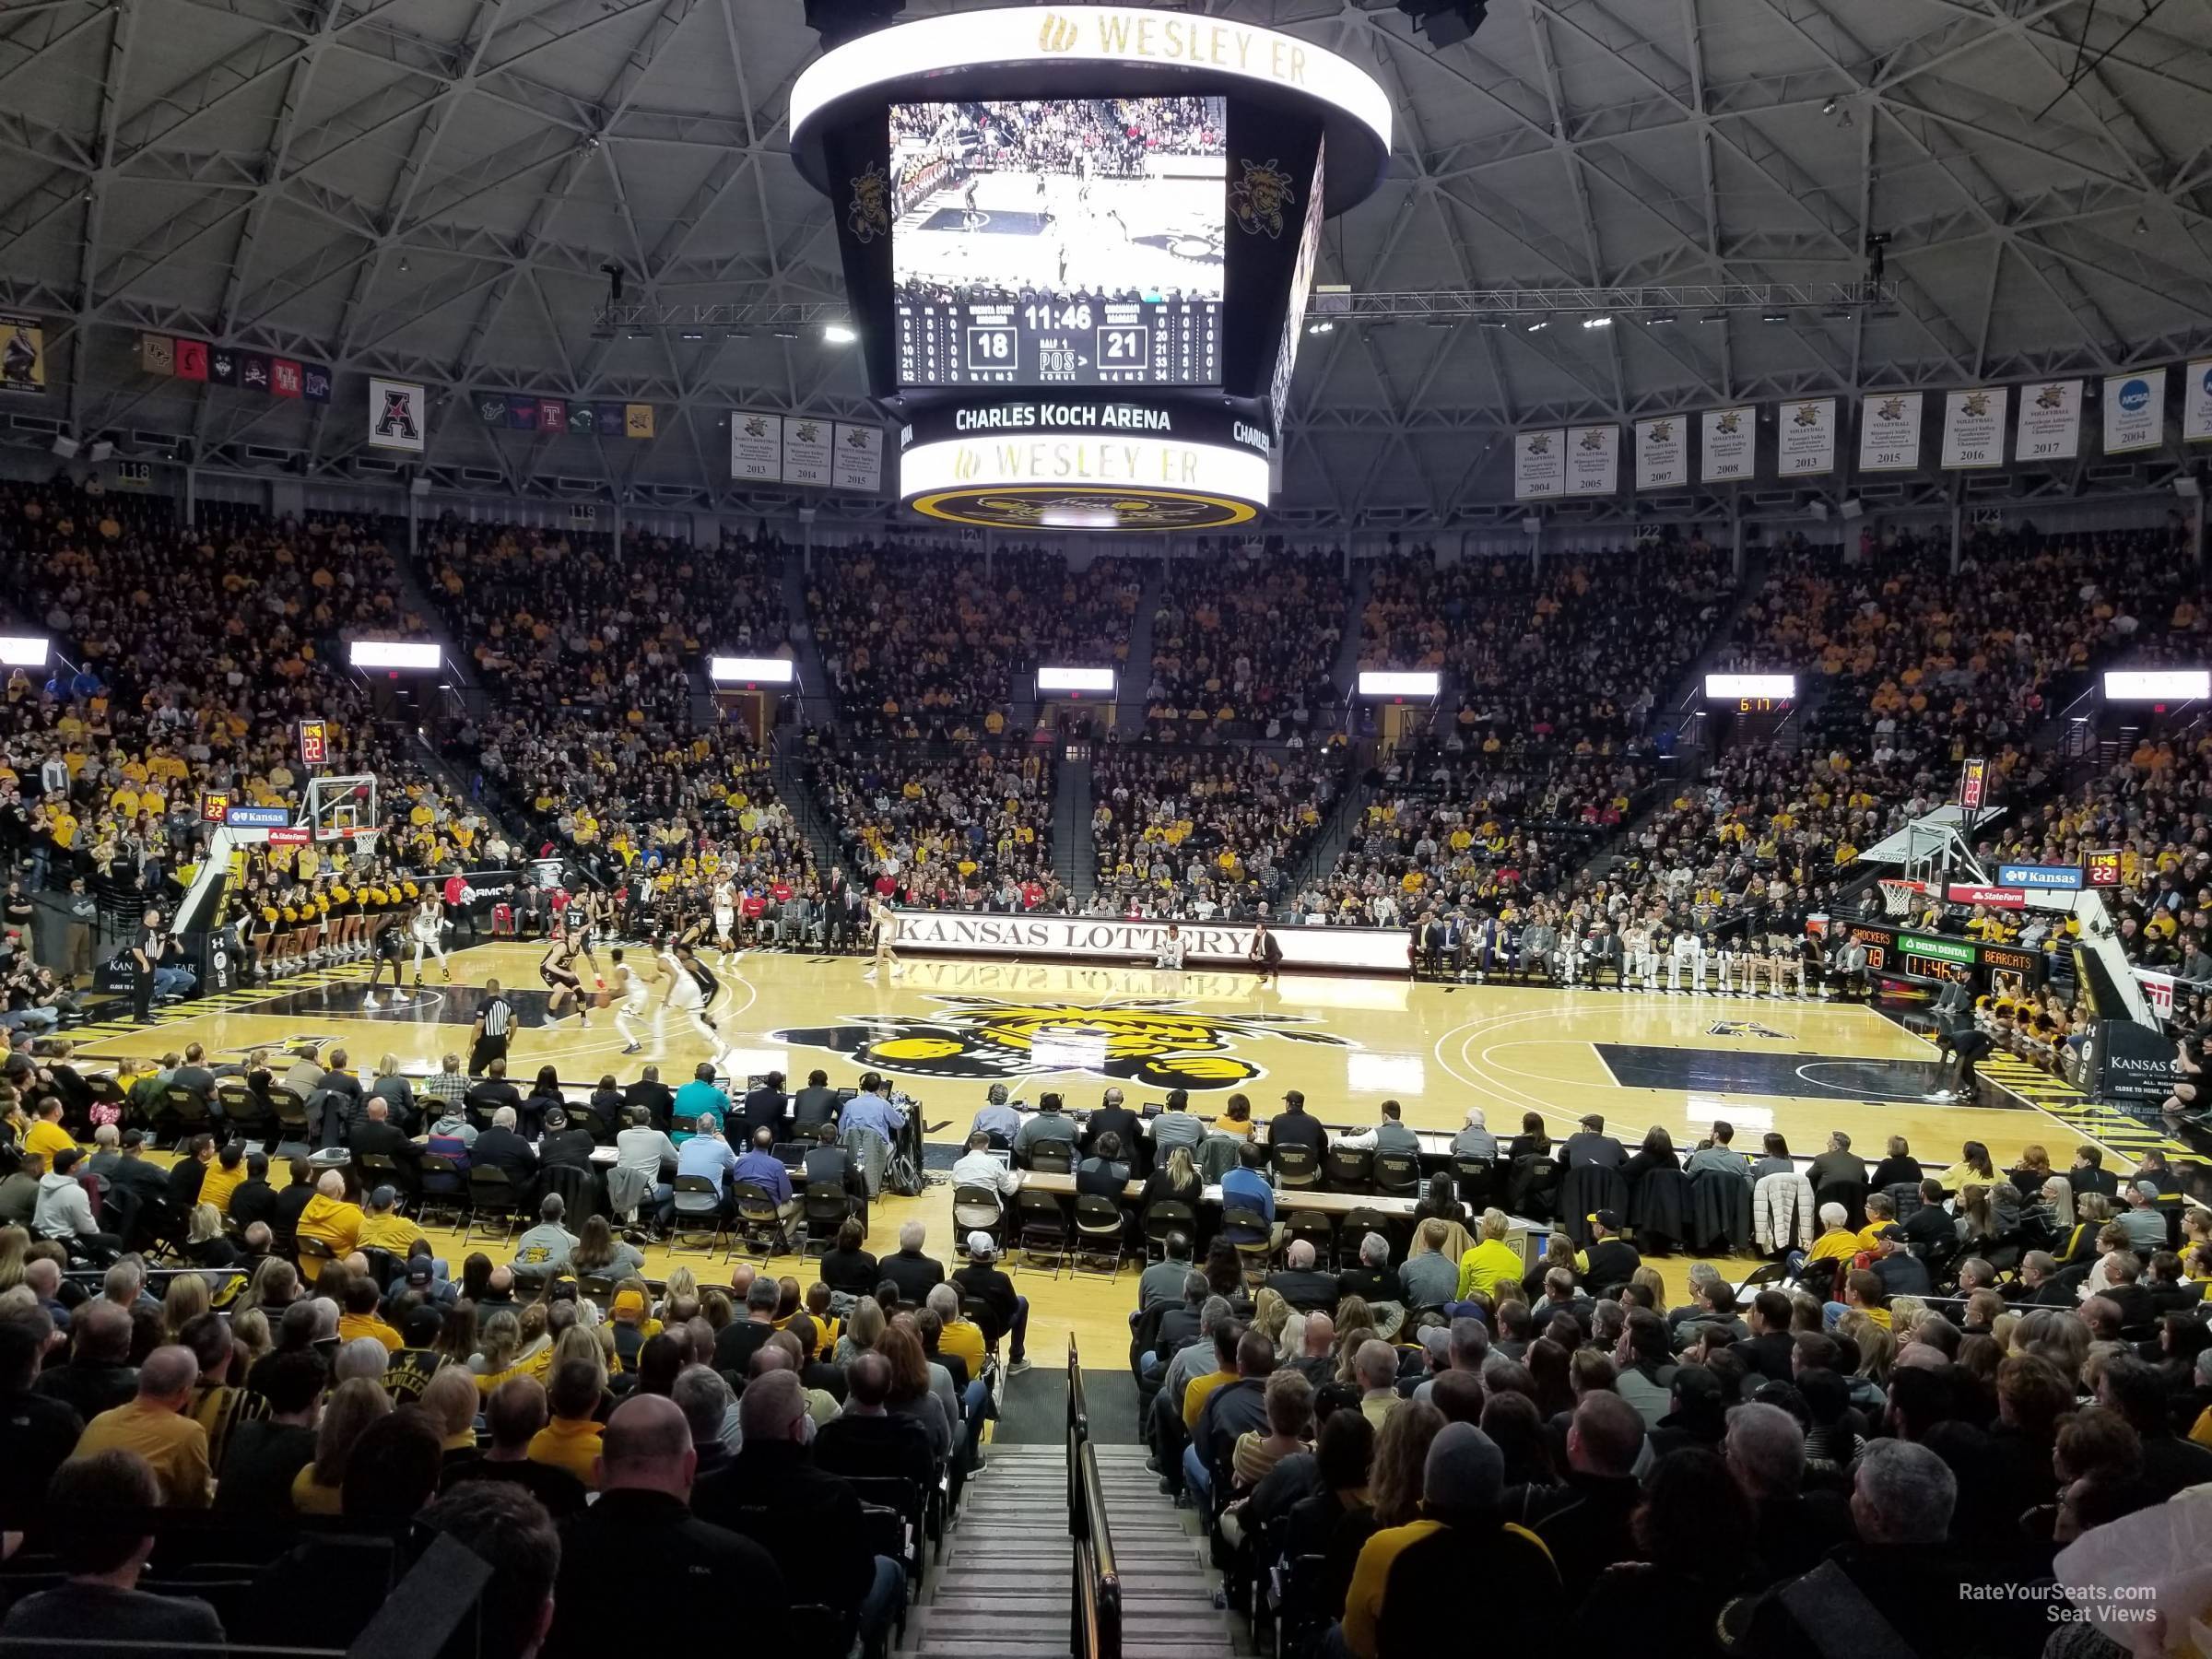 section 106, row 14 seat view  - charles koch arena